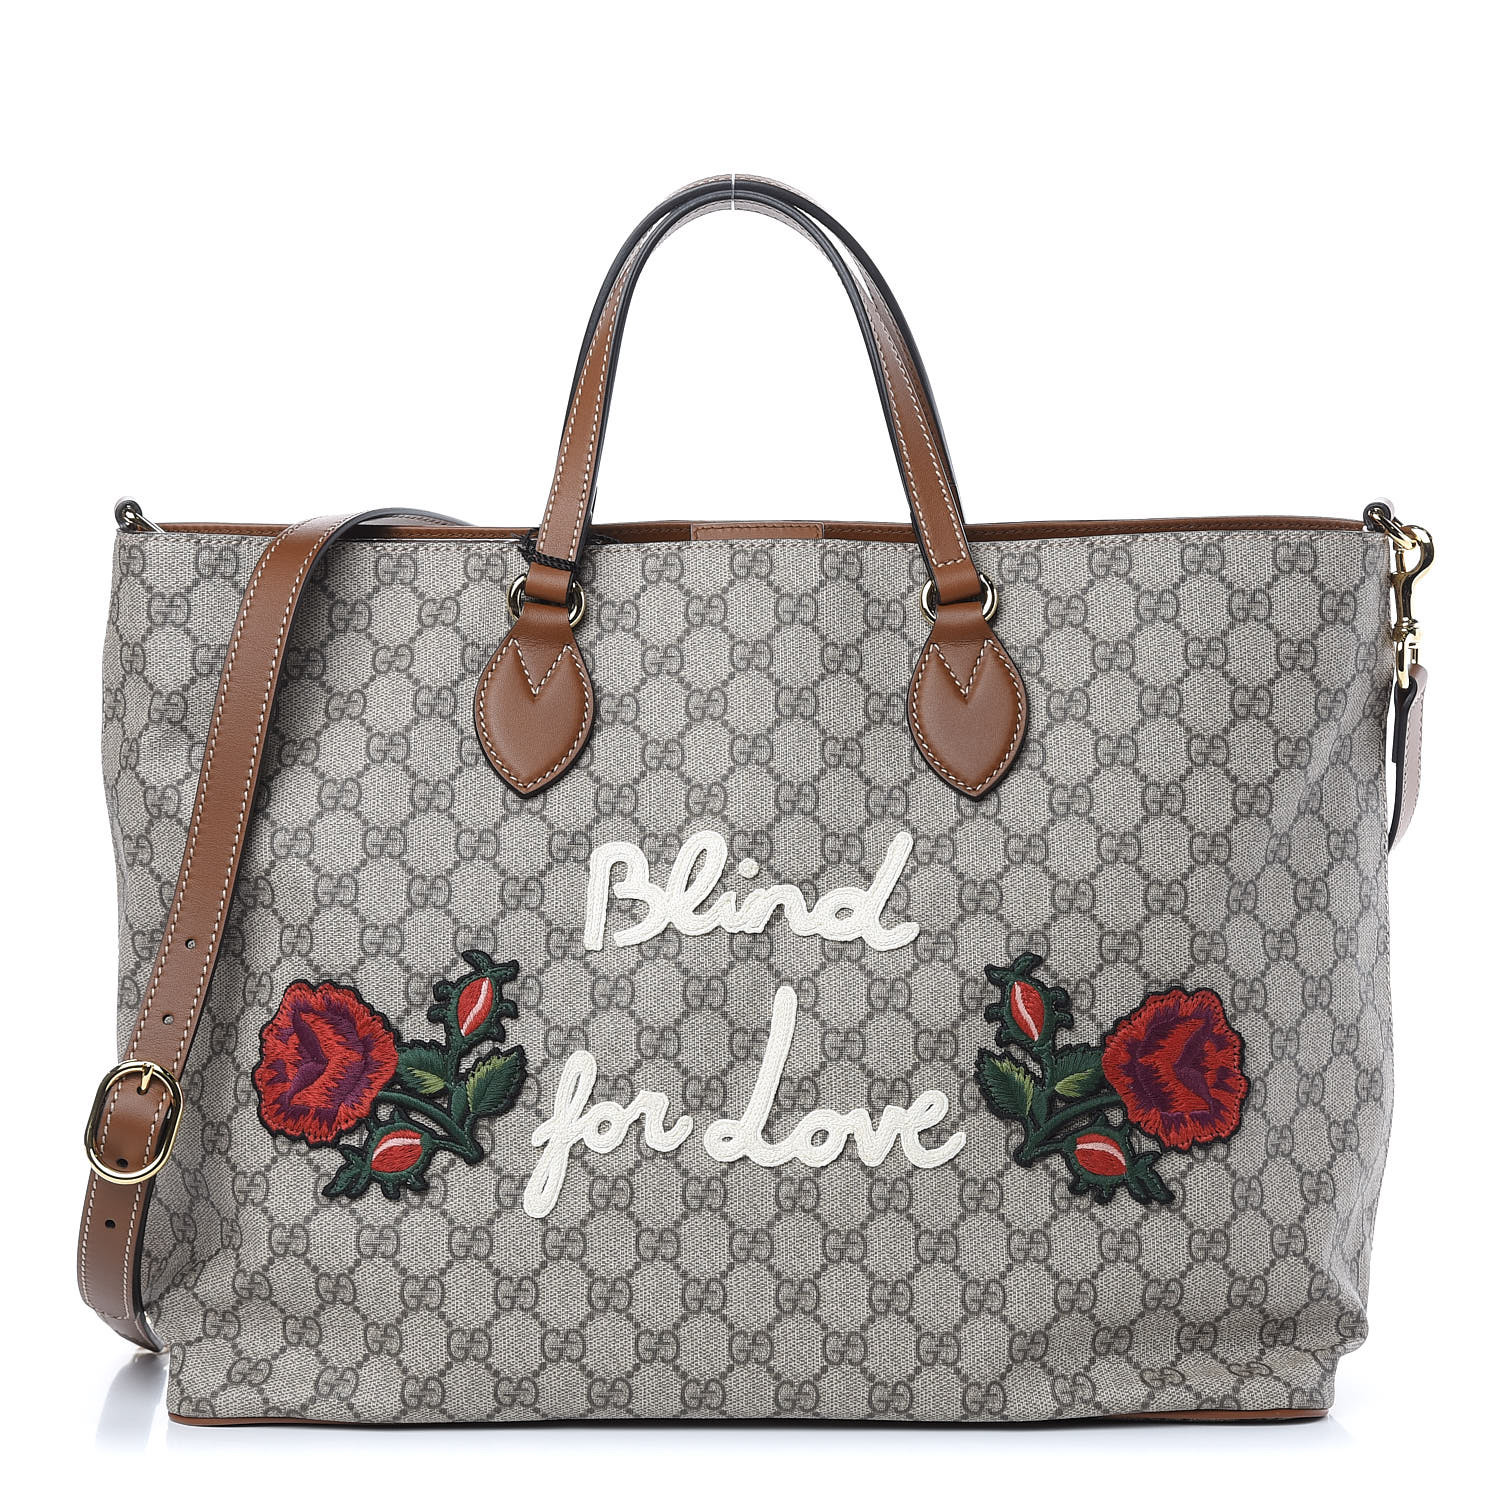 gucci blind for love tote bag, OFF 70 